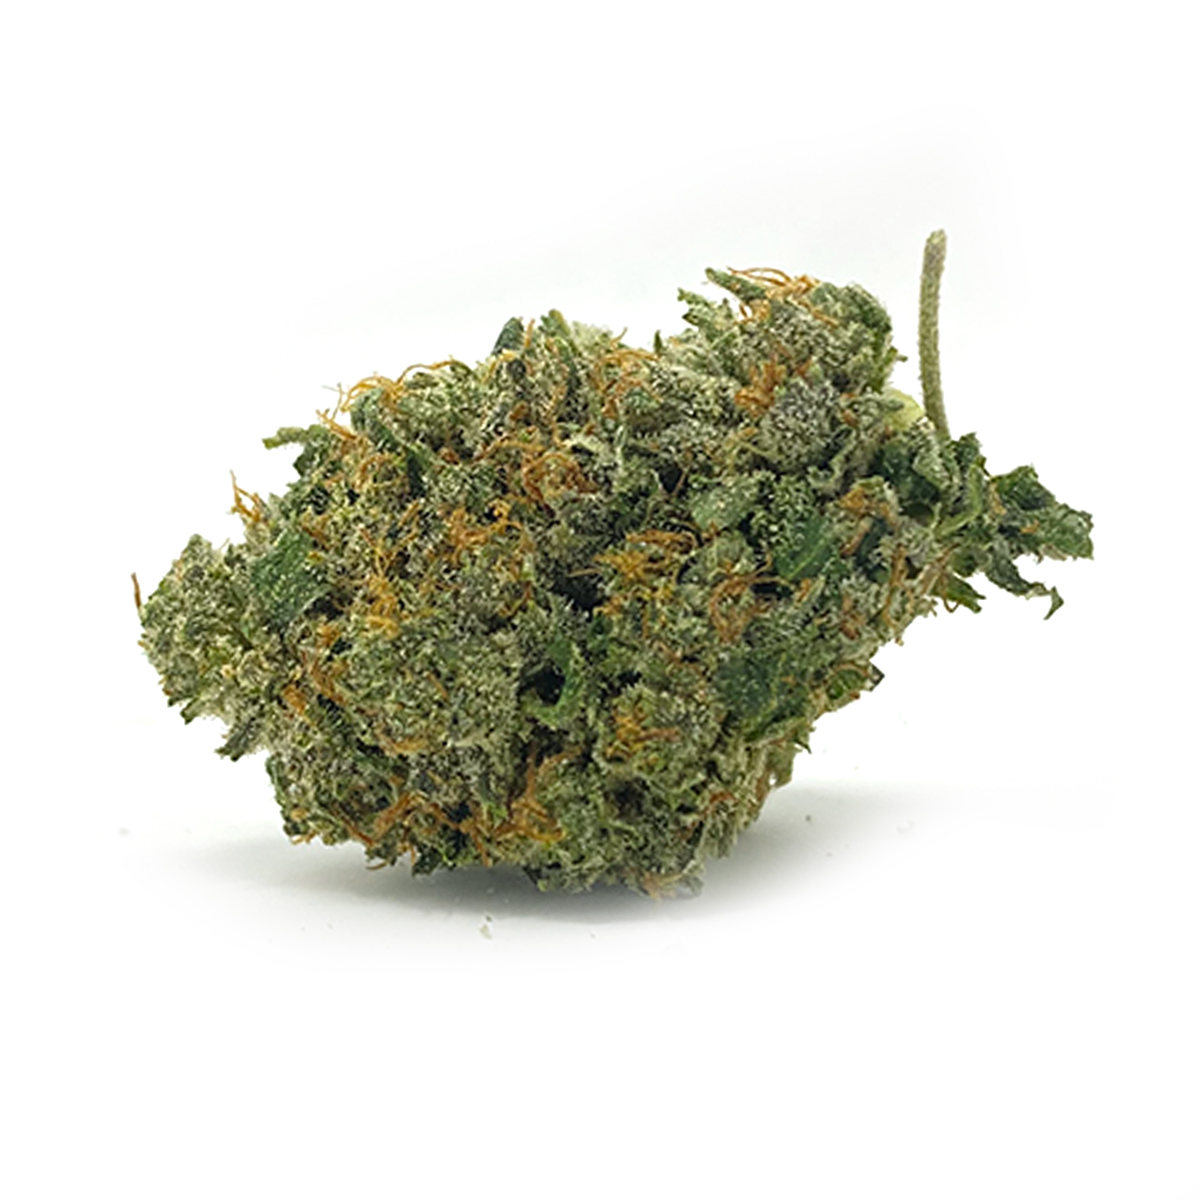 Tom Ford Pink | Buy Weed Online | Dispensary Near Me